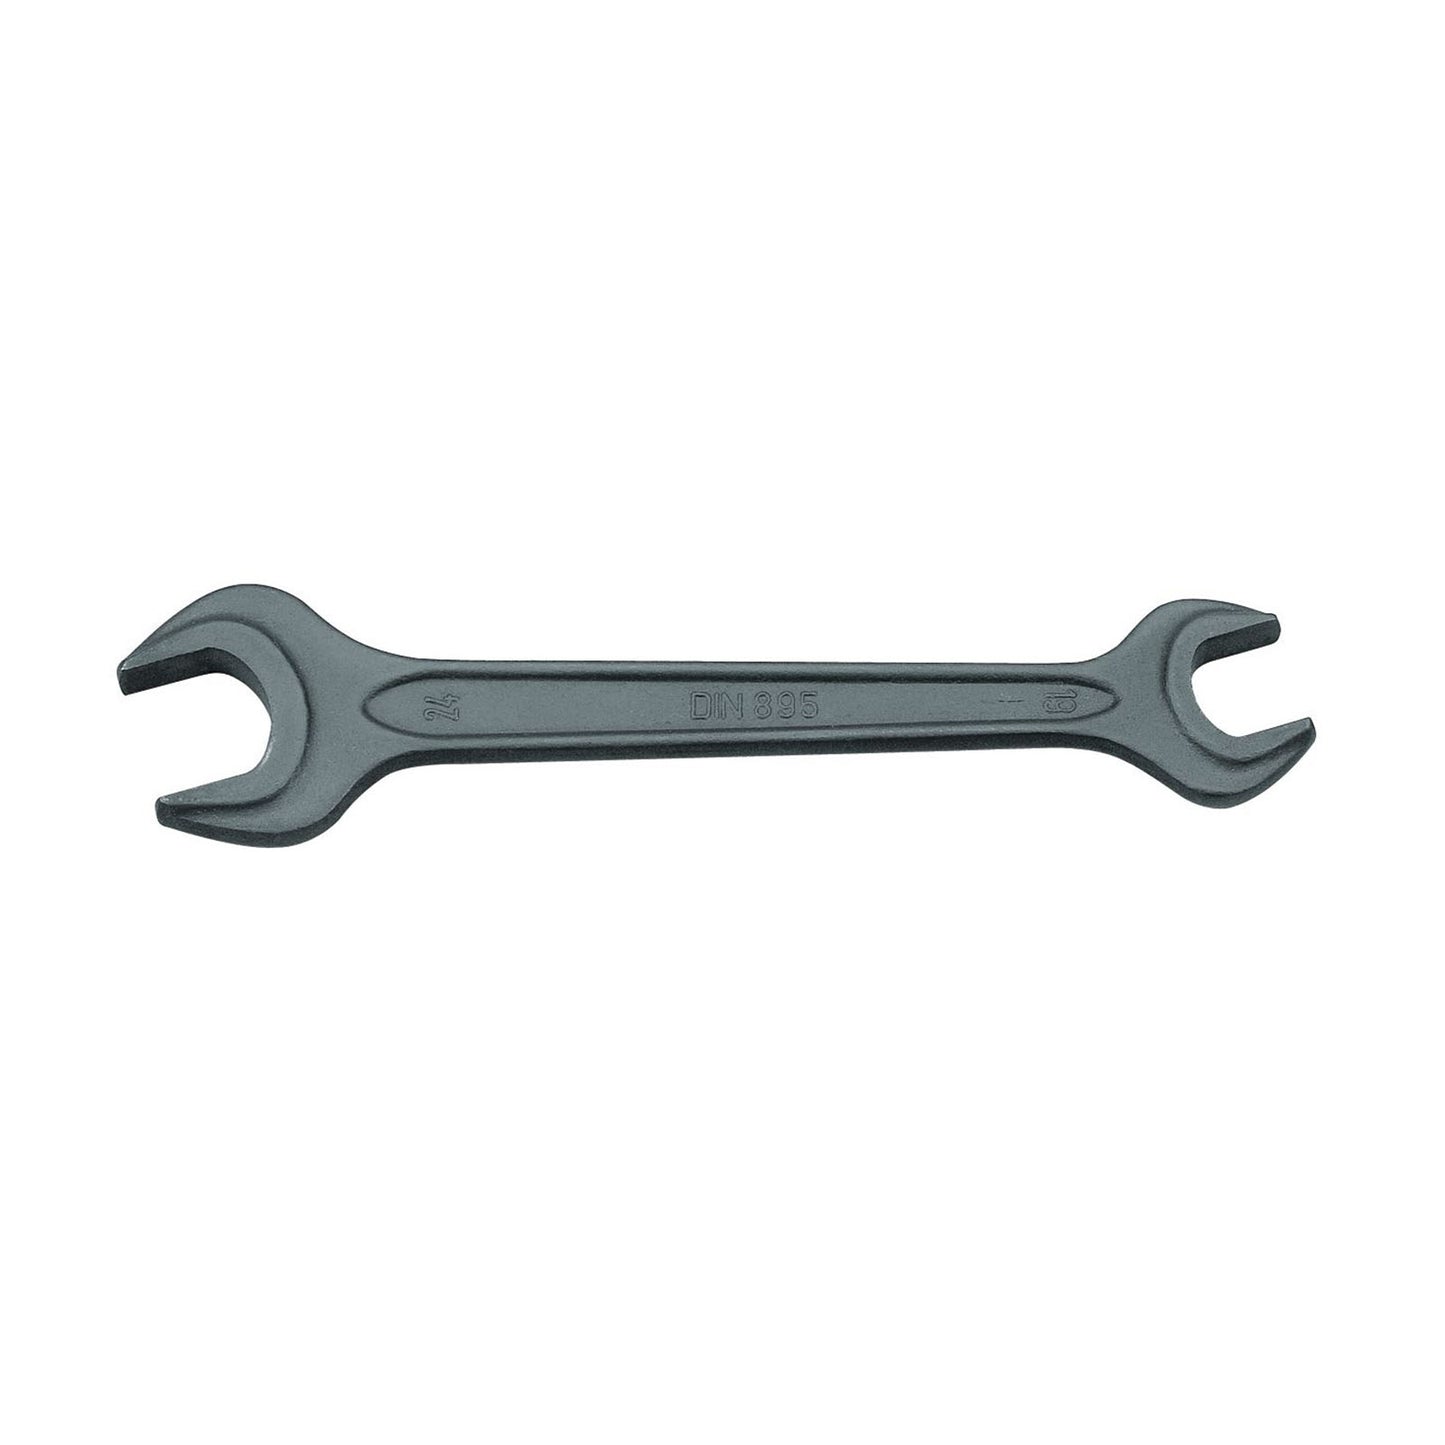 GEDORE 895 8X9 - 2-Mount Fixed Wrench, 8x9 (6584130)